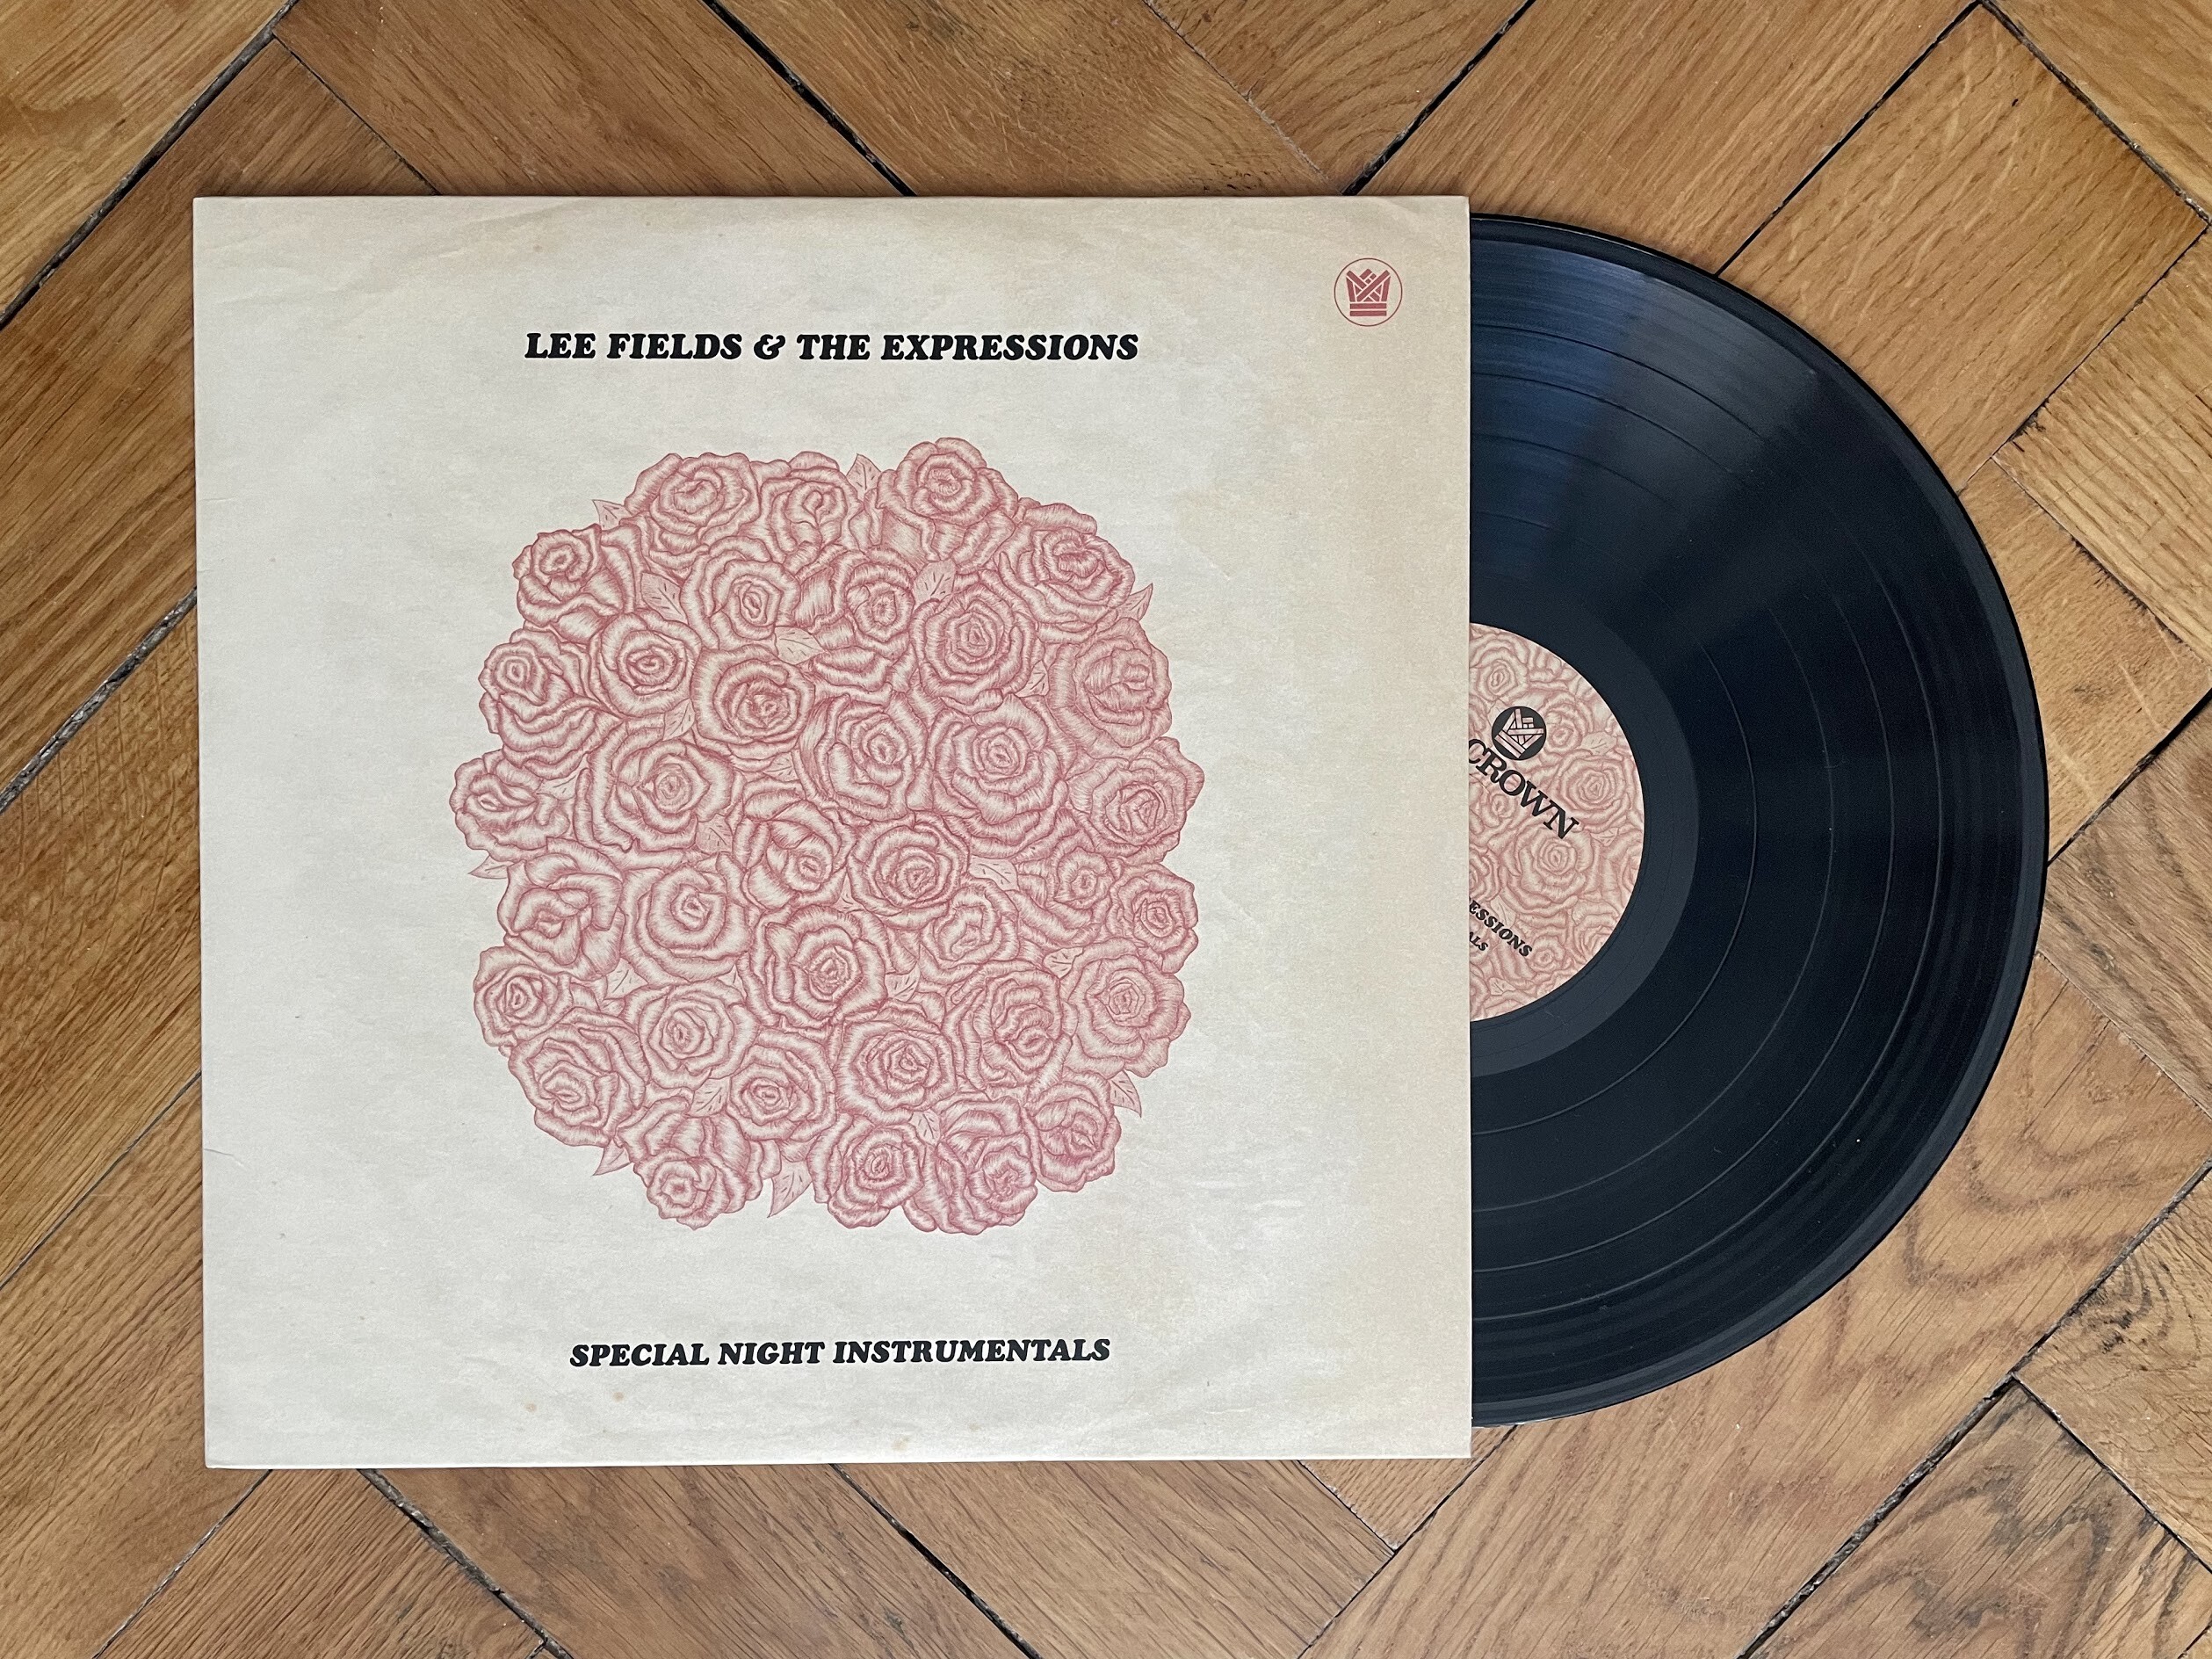 Lee Fields & The Expressions – Special Night Instrumentals (Big Crown Records)